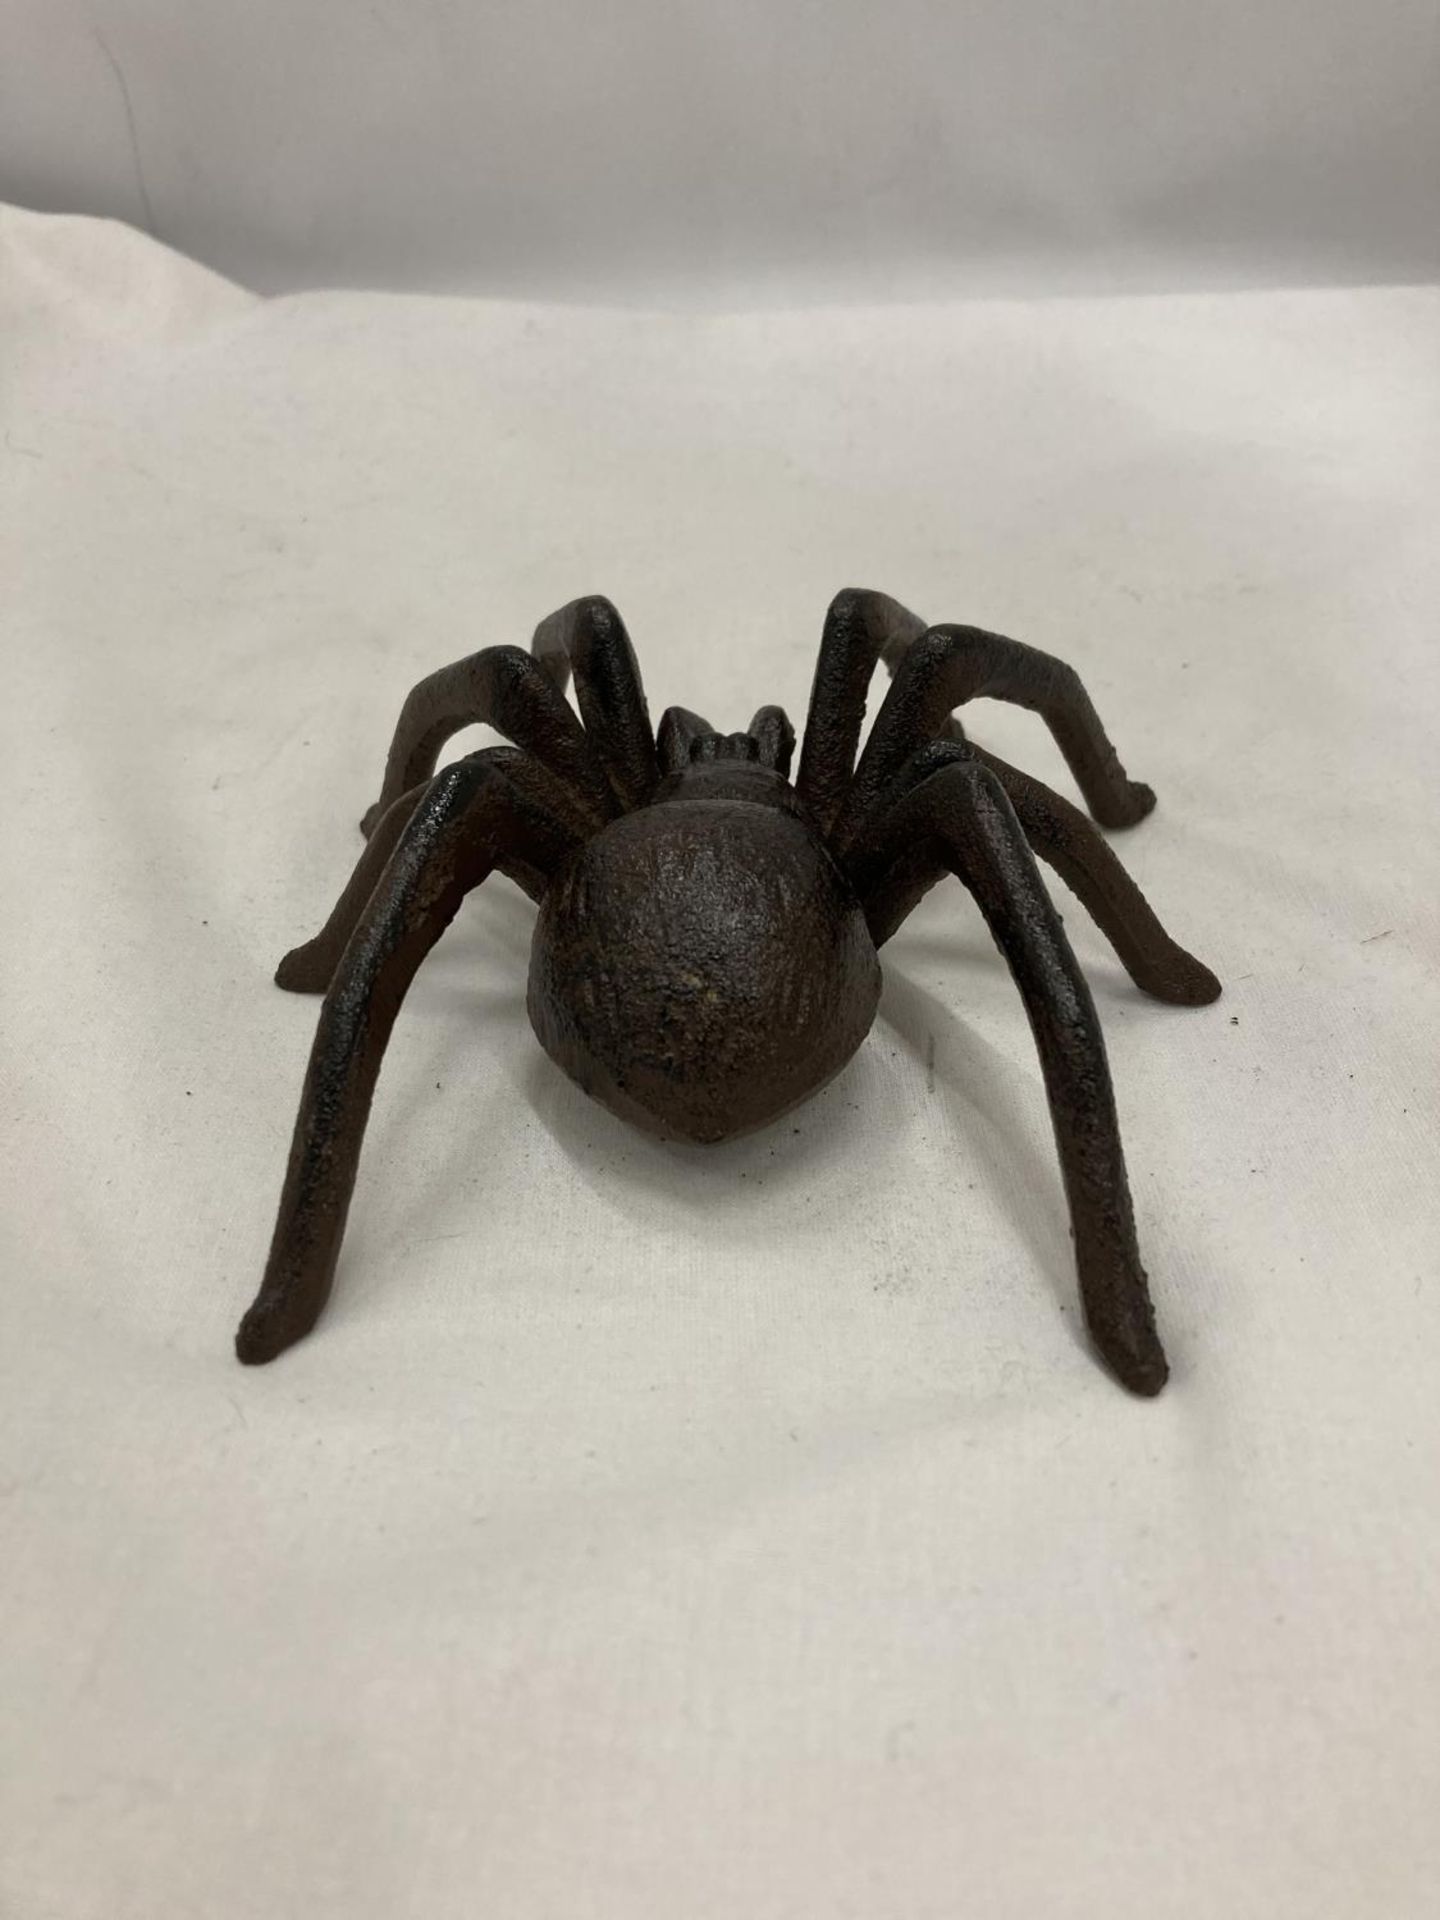 A CAST METAL MODEL OF A SPIDER - Image 4 of 5